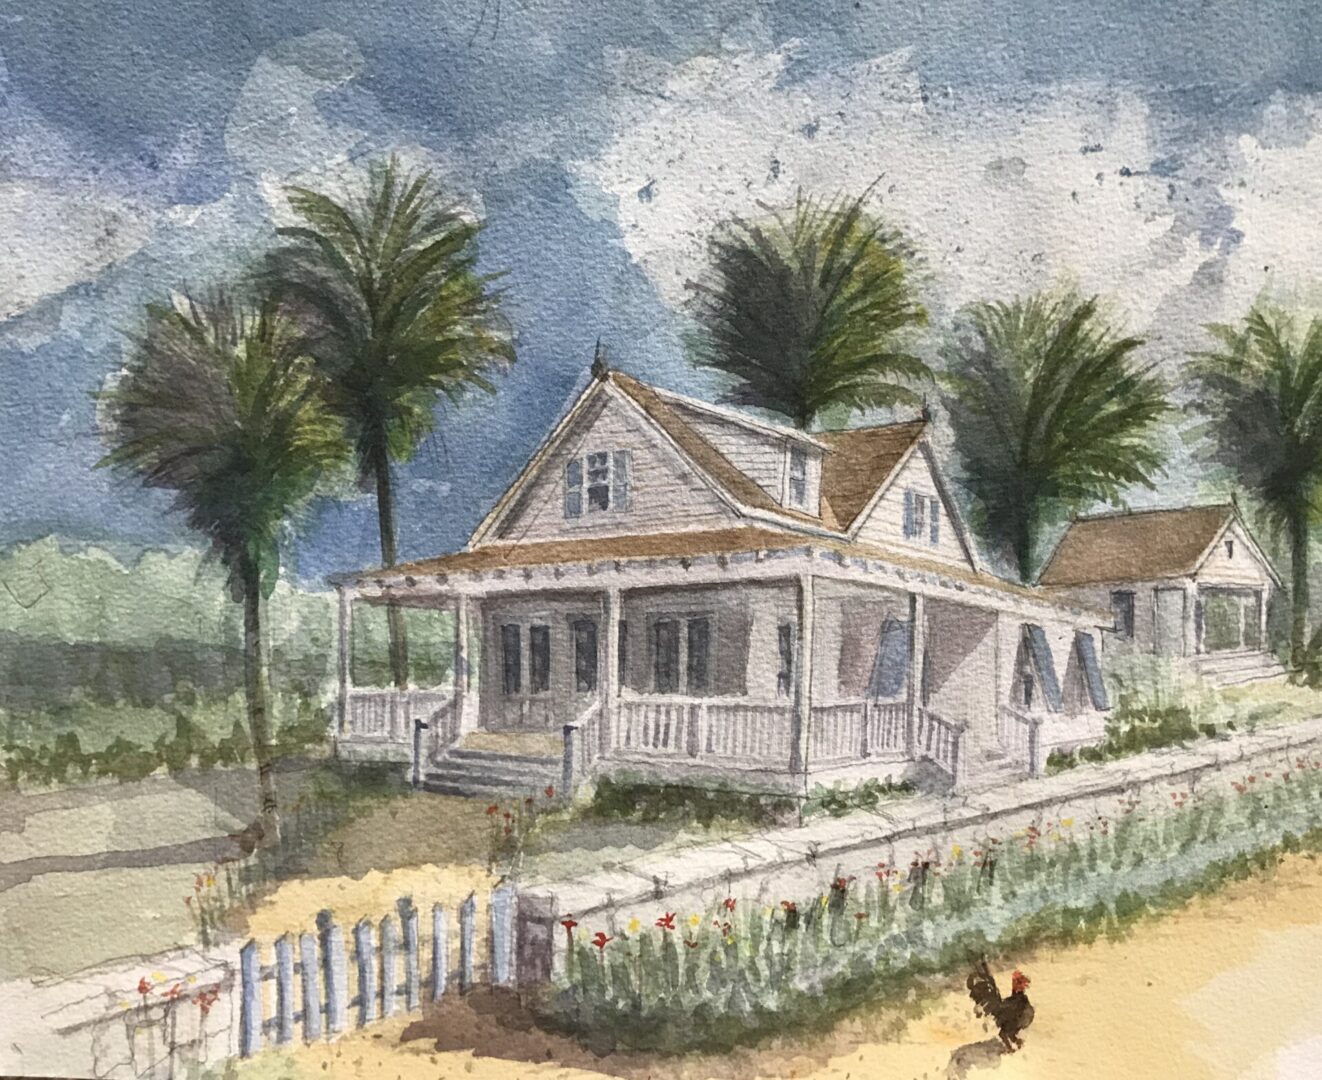 A colorful painting of the wooden house with fencing